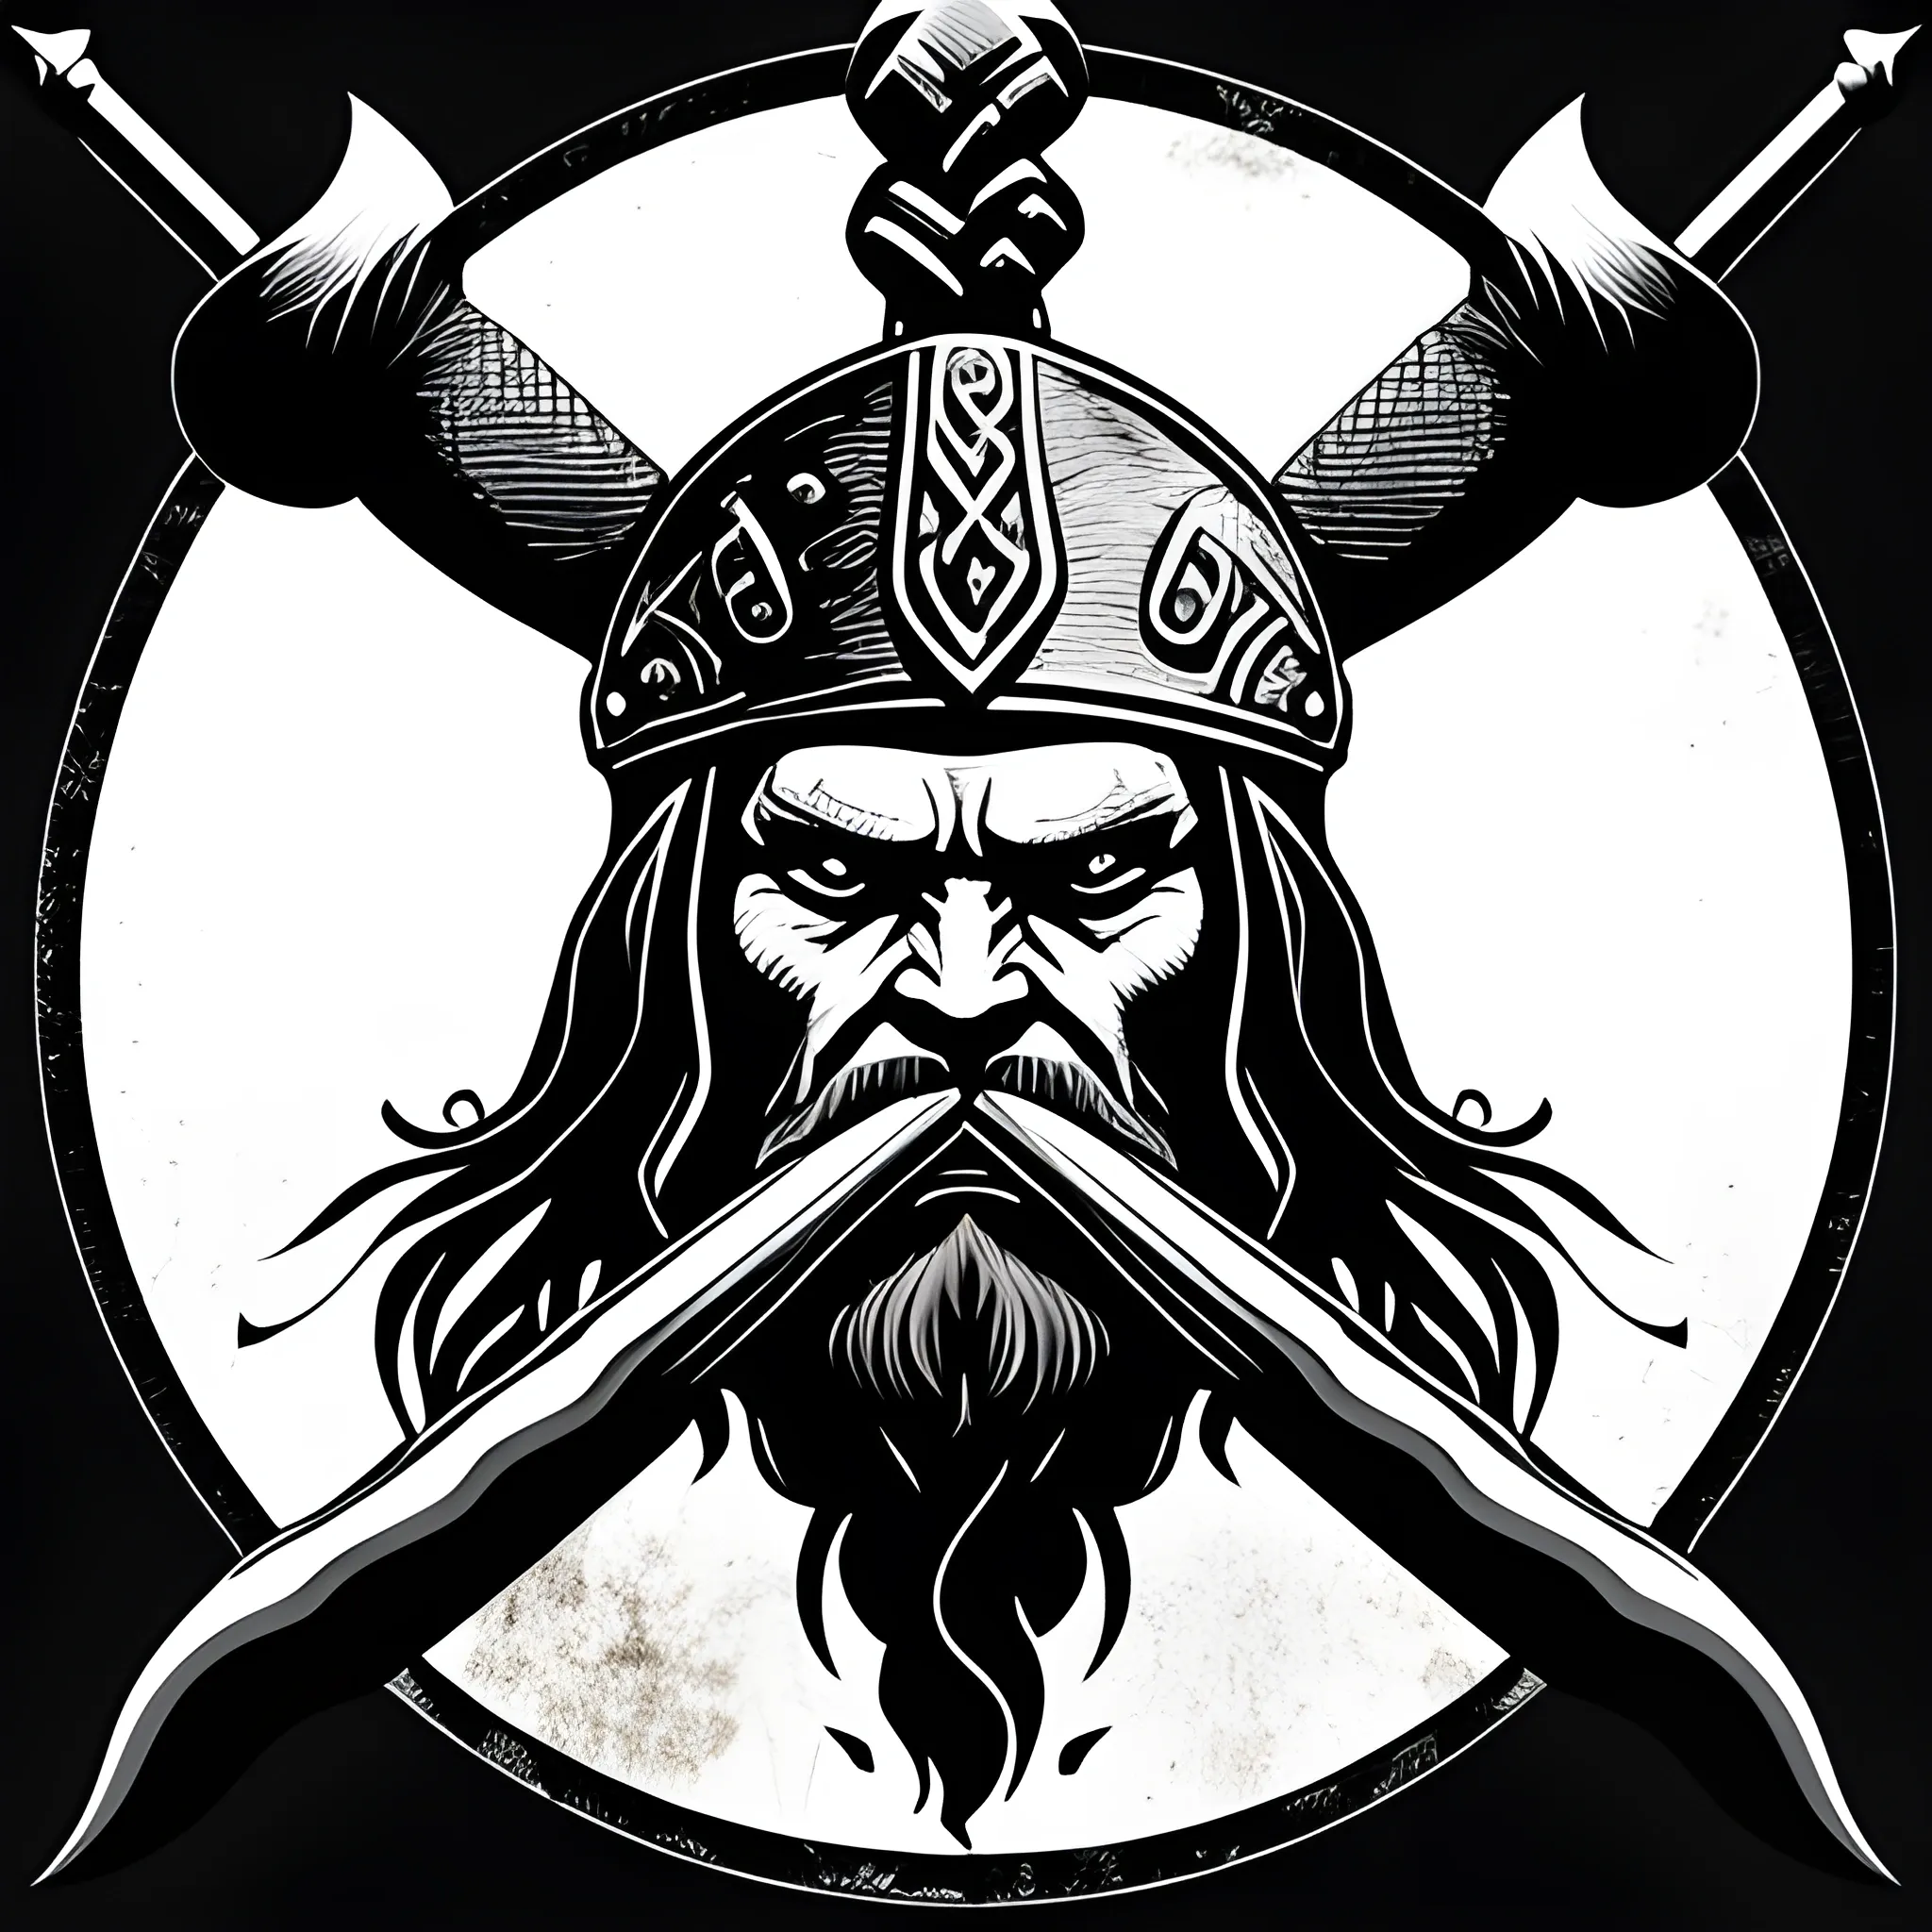 Viking with two axes, black background, ready to fight, logo, warcry, no text